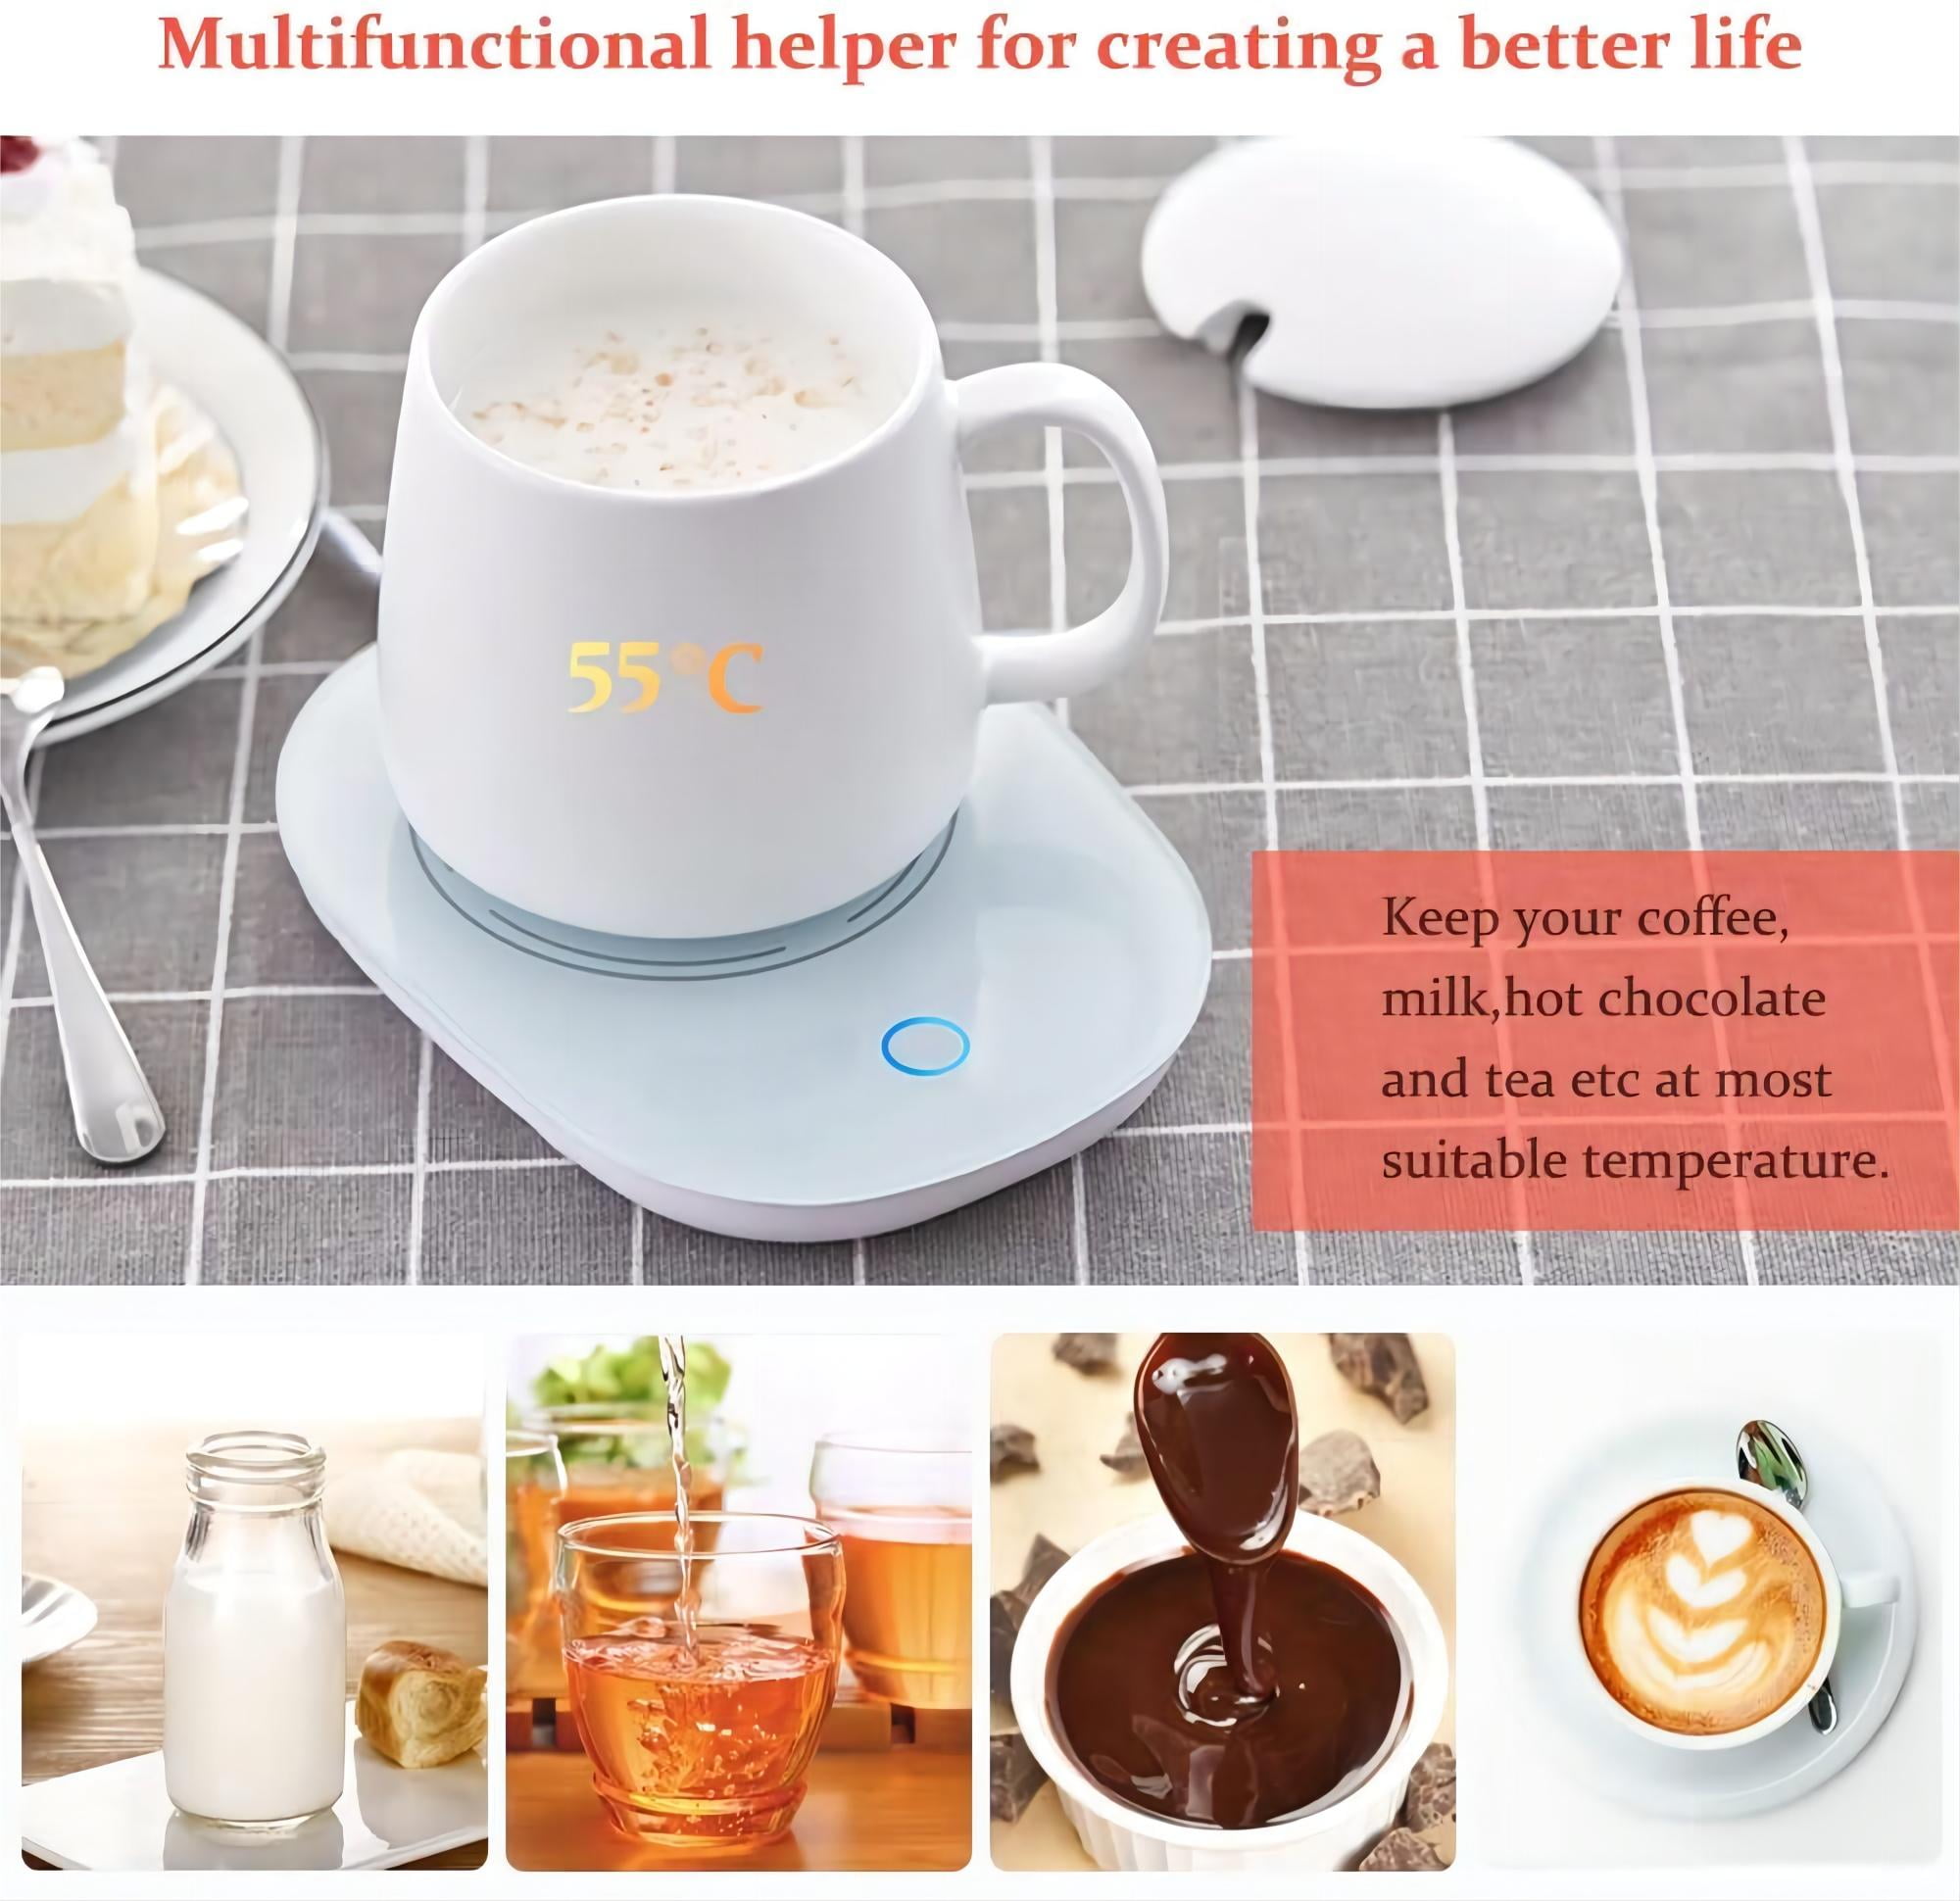 AHYBZN Coffee Mug Warmer,Smart Warmers Desk Cup Electric Plate Auto On/Off Gravity Induction Intelligent Gravity Sensing Heater Heating Beverage Drink for